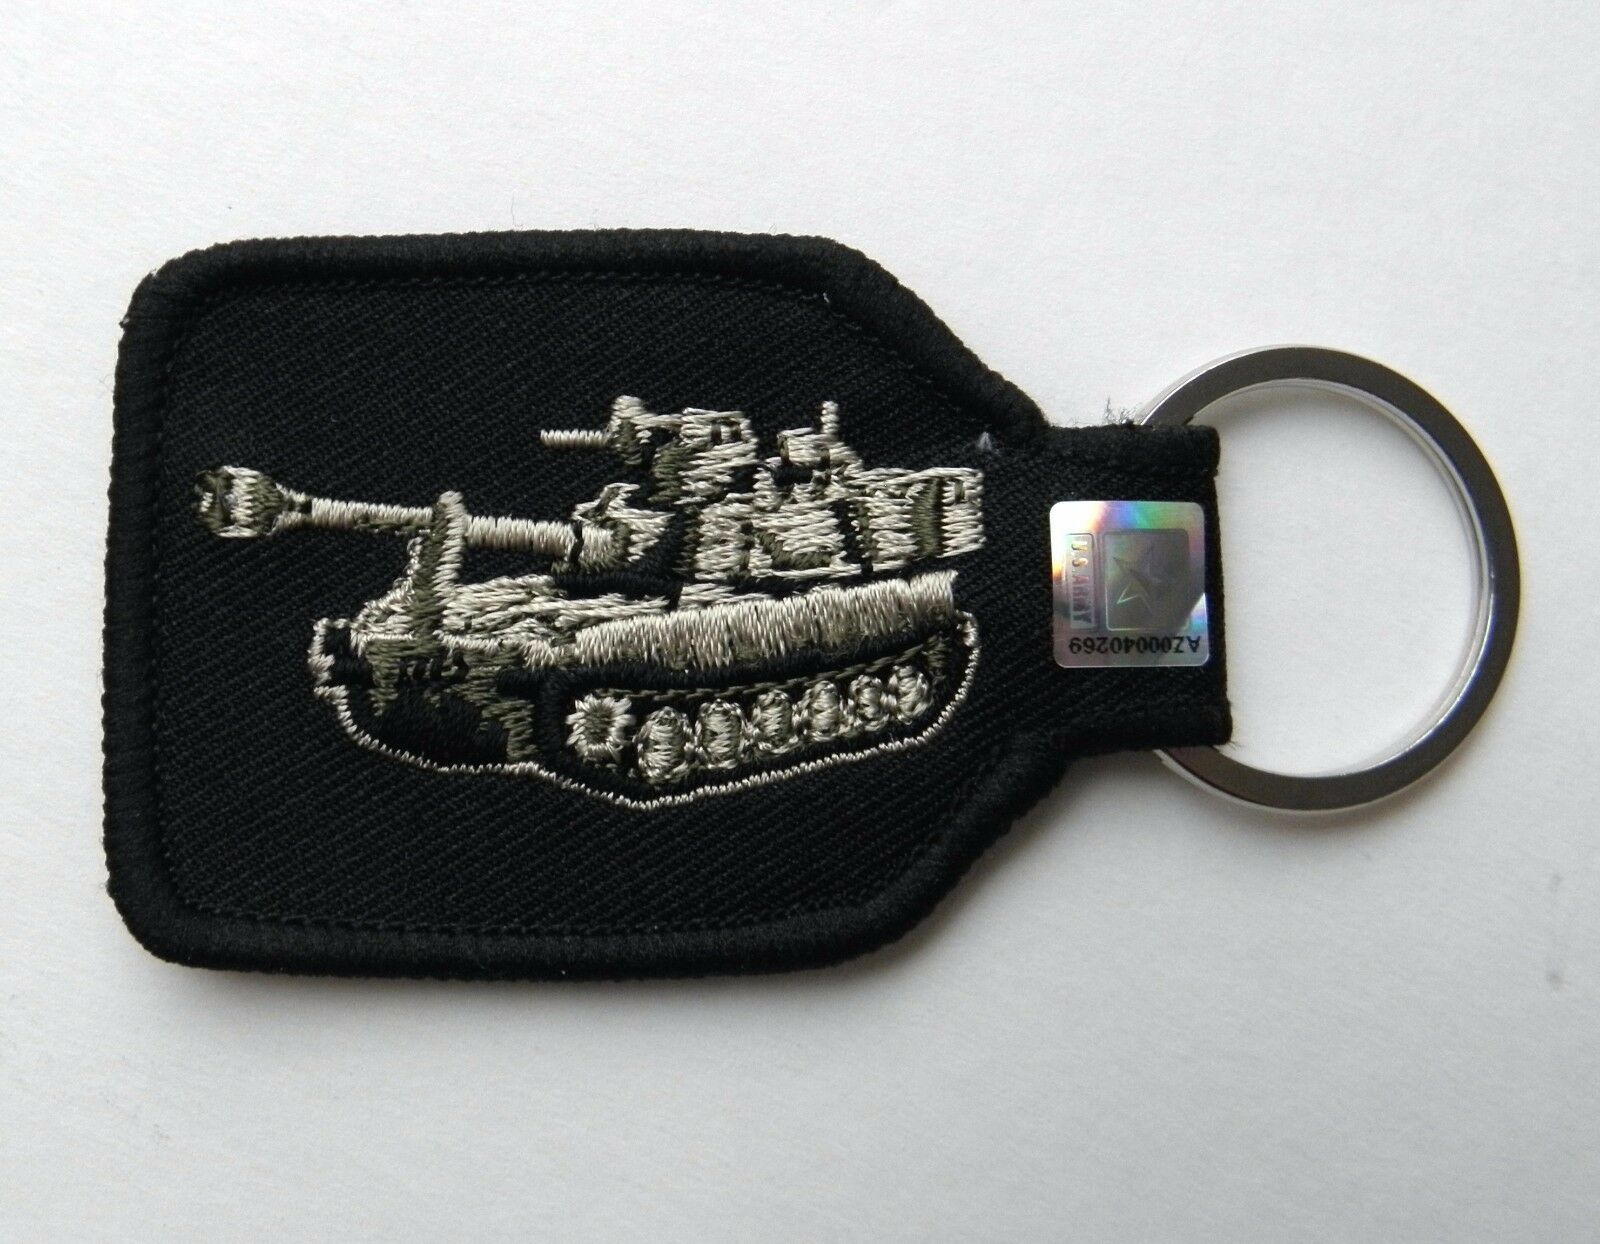 US ARMY ARMORED DIVISION TANK EMBROIDERED KEY CHAIN KEY RING 1.75 X 2.75 - $5.64